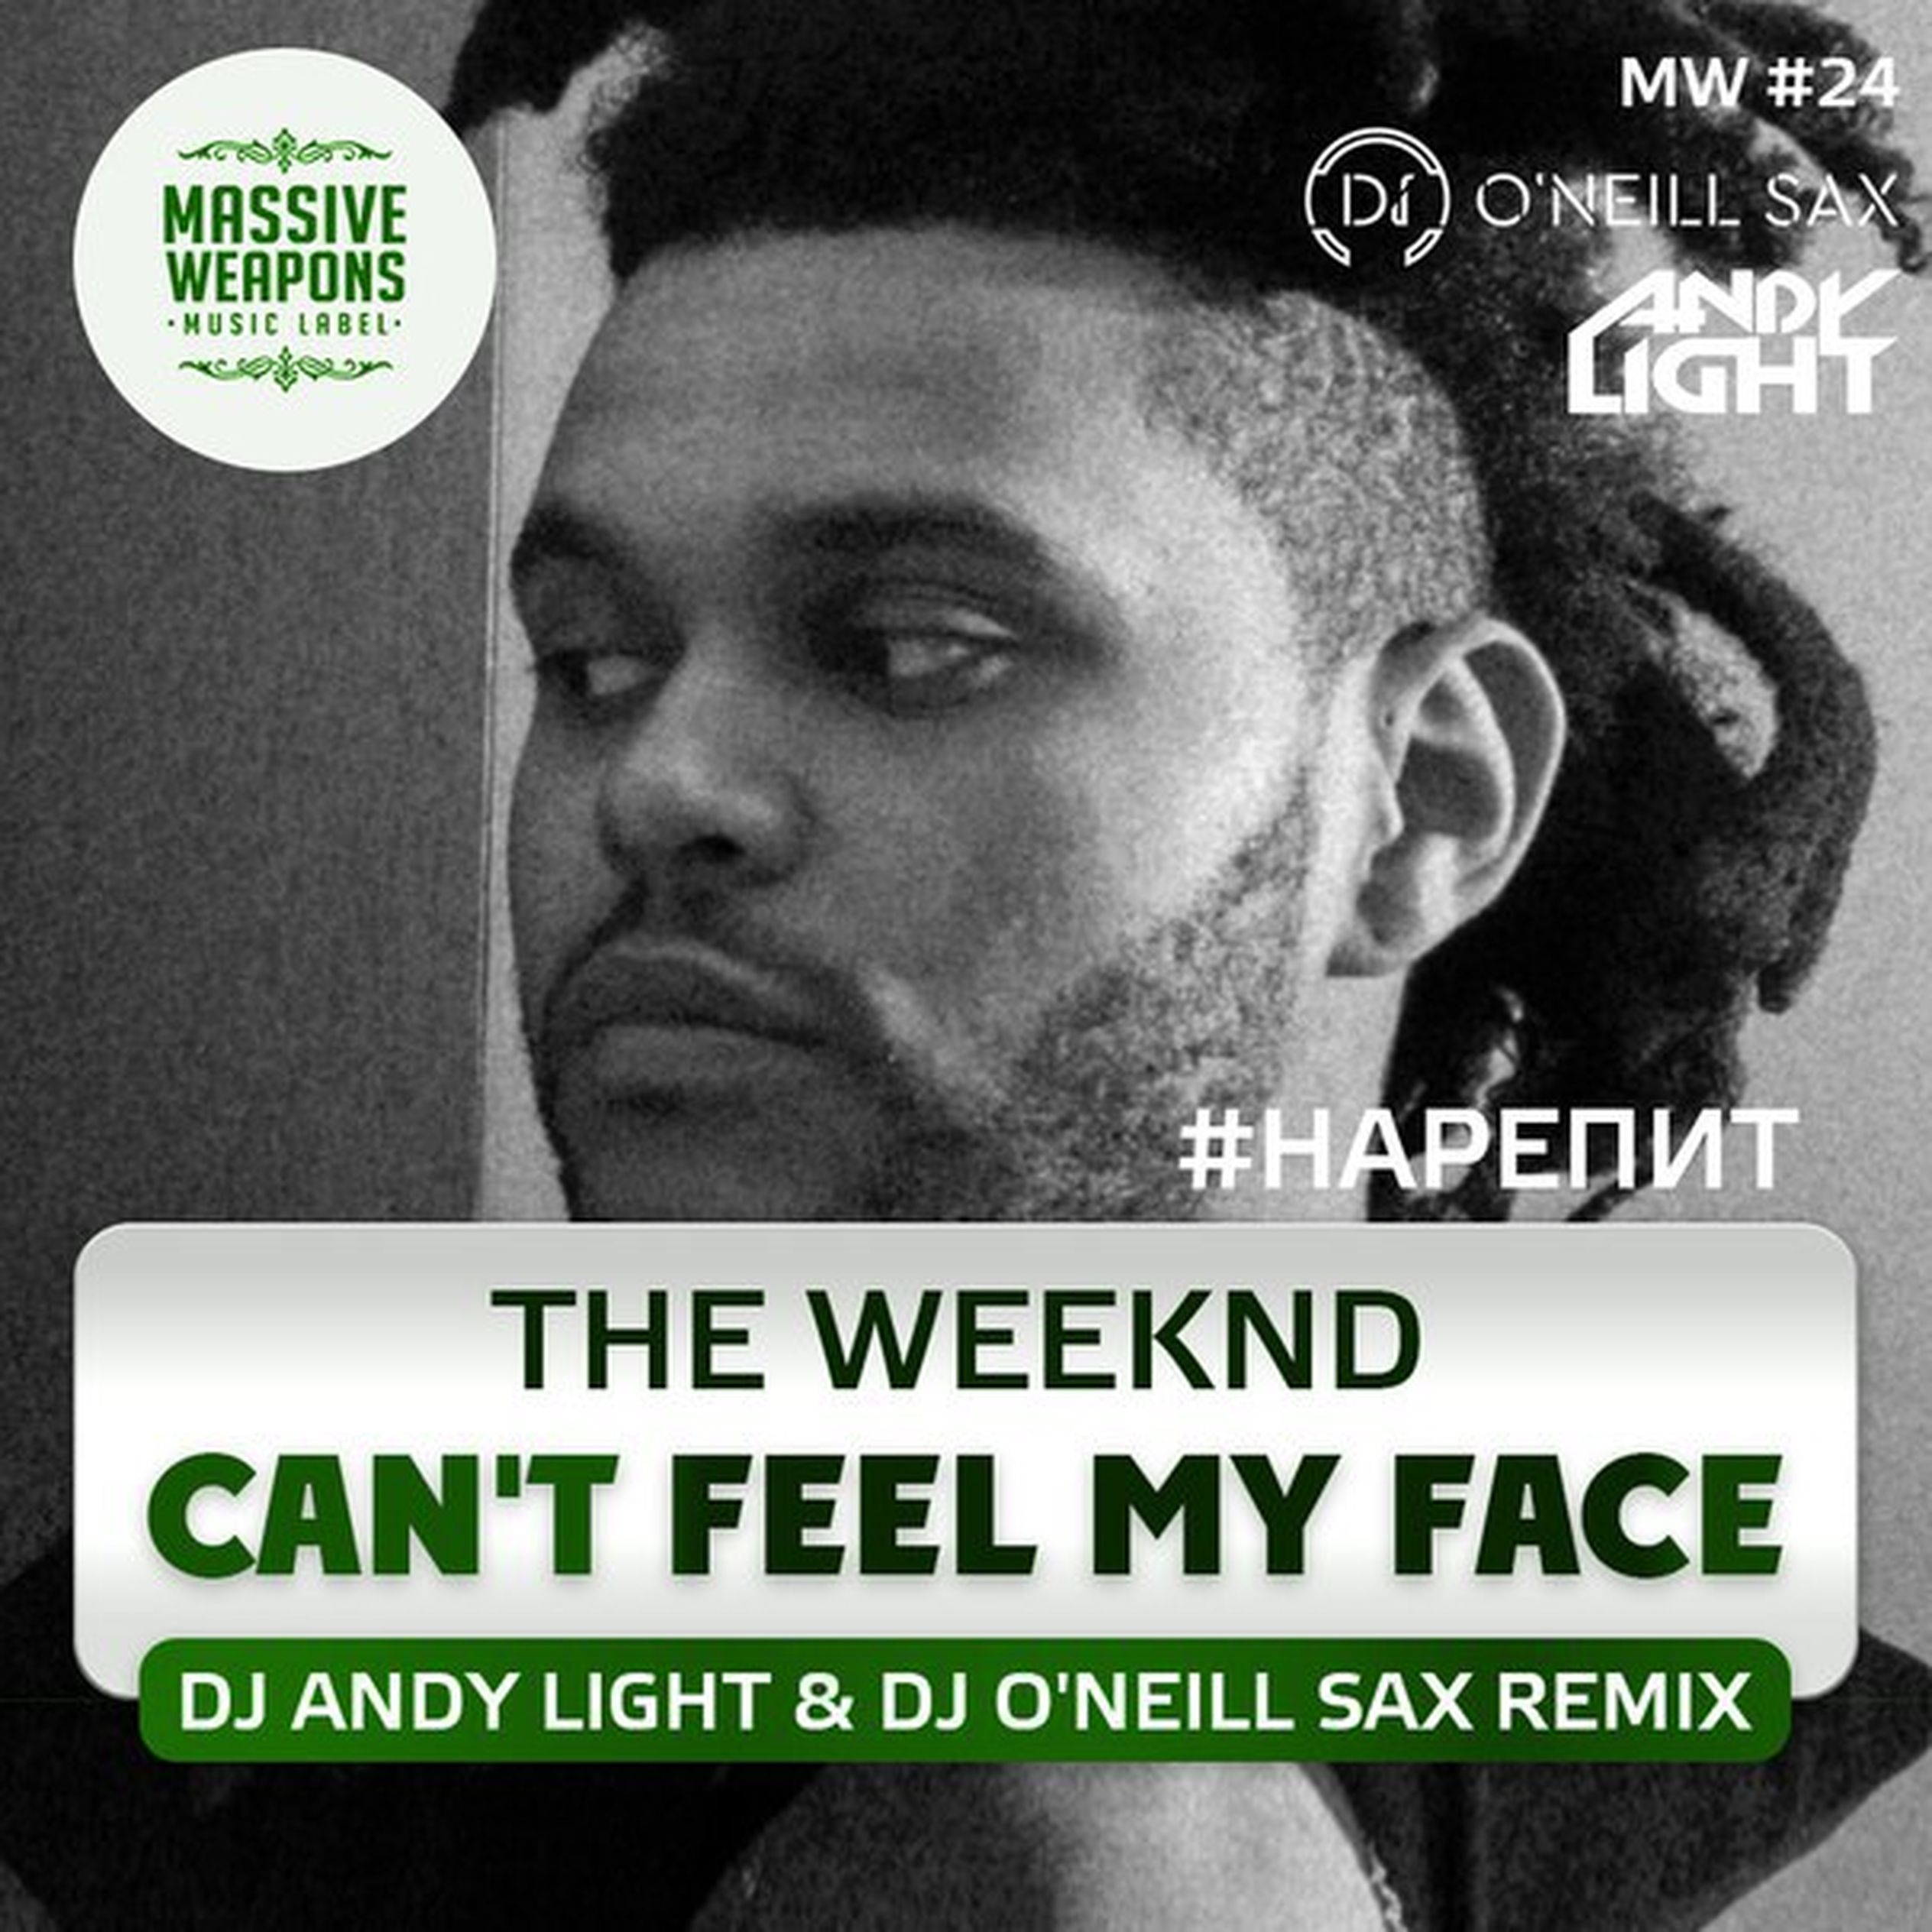 The Weeknd can't feel my face. Feel - the Weeknd - DJ feel. Света Andy Light DJ. Cant feel my face перевод.